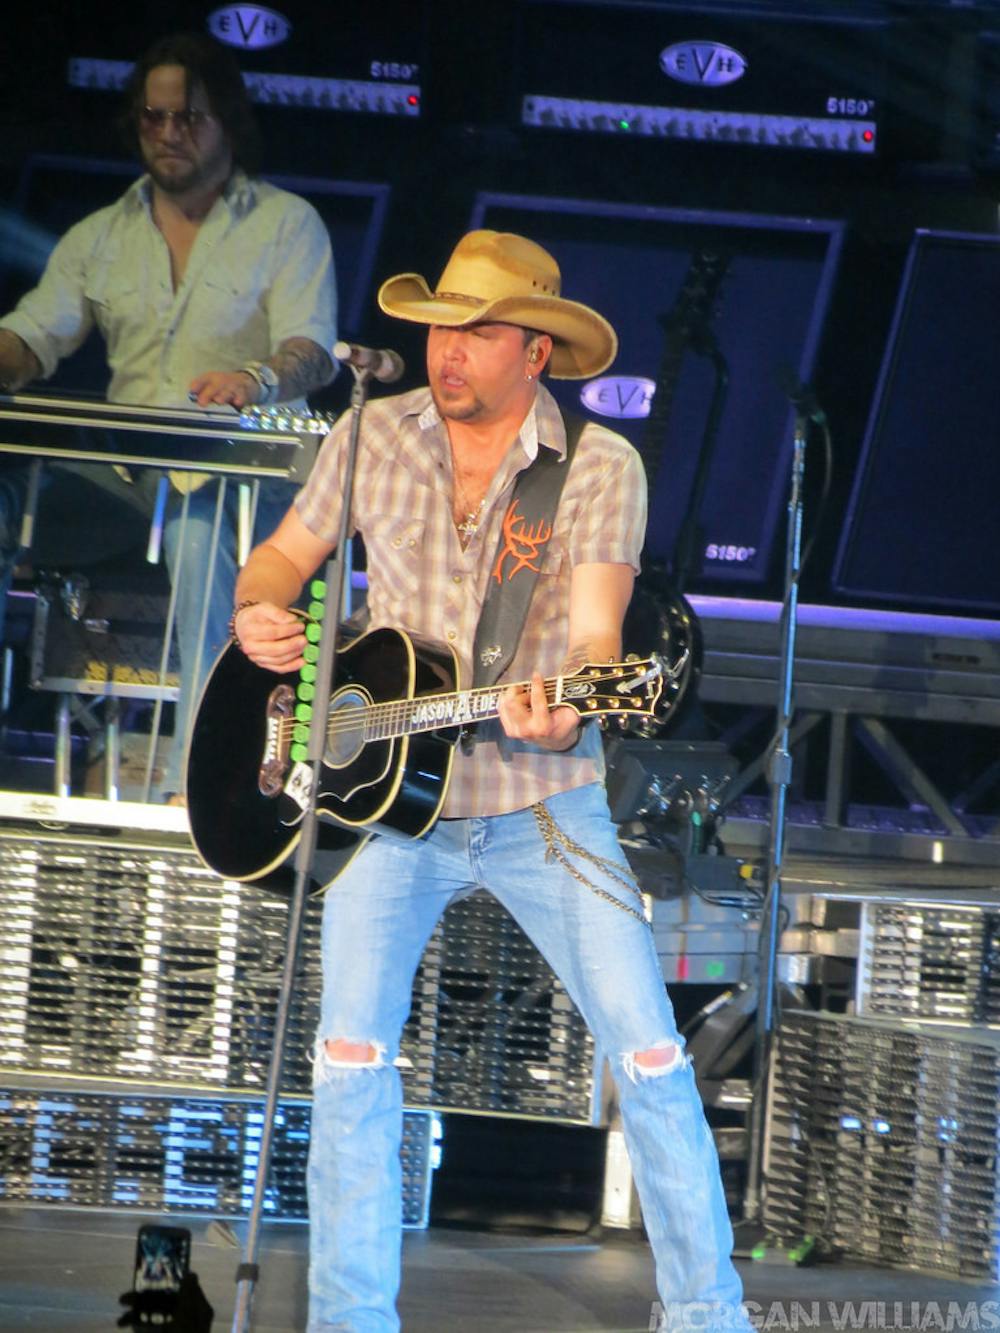 <p>Jason Aldean photographed on the 2014 Night Train Tour. Photo by Morgan Williams, used under Creative Commons 2.0. </p>